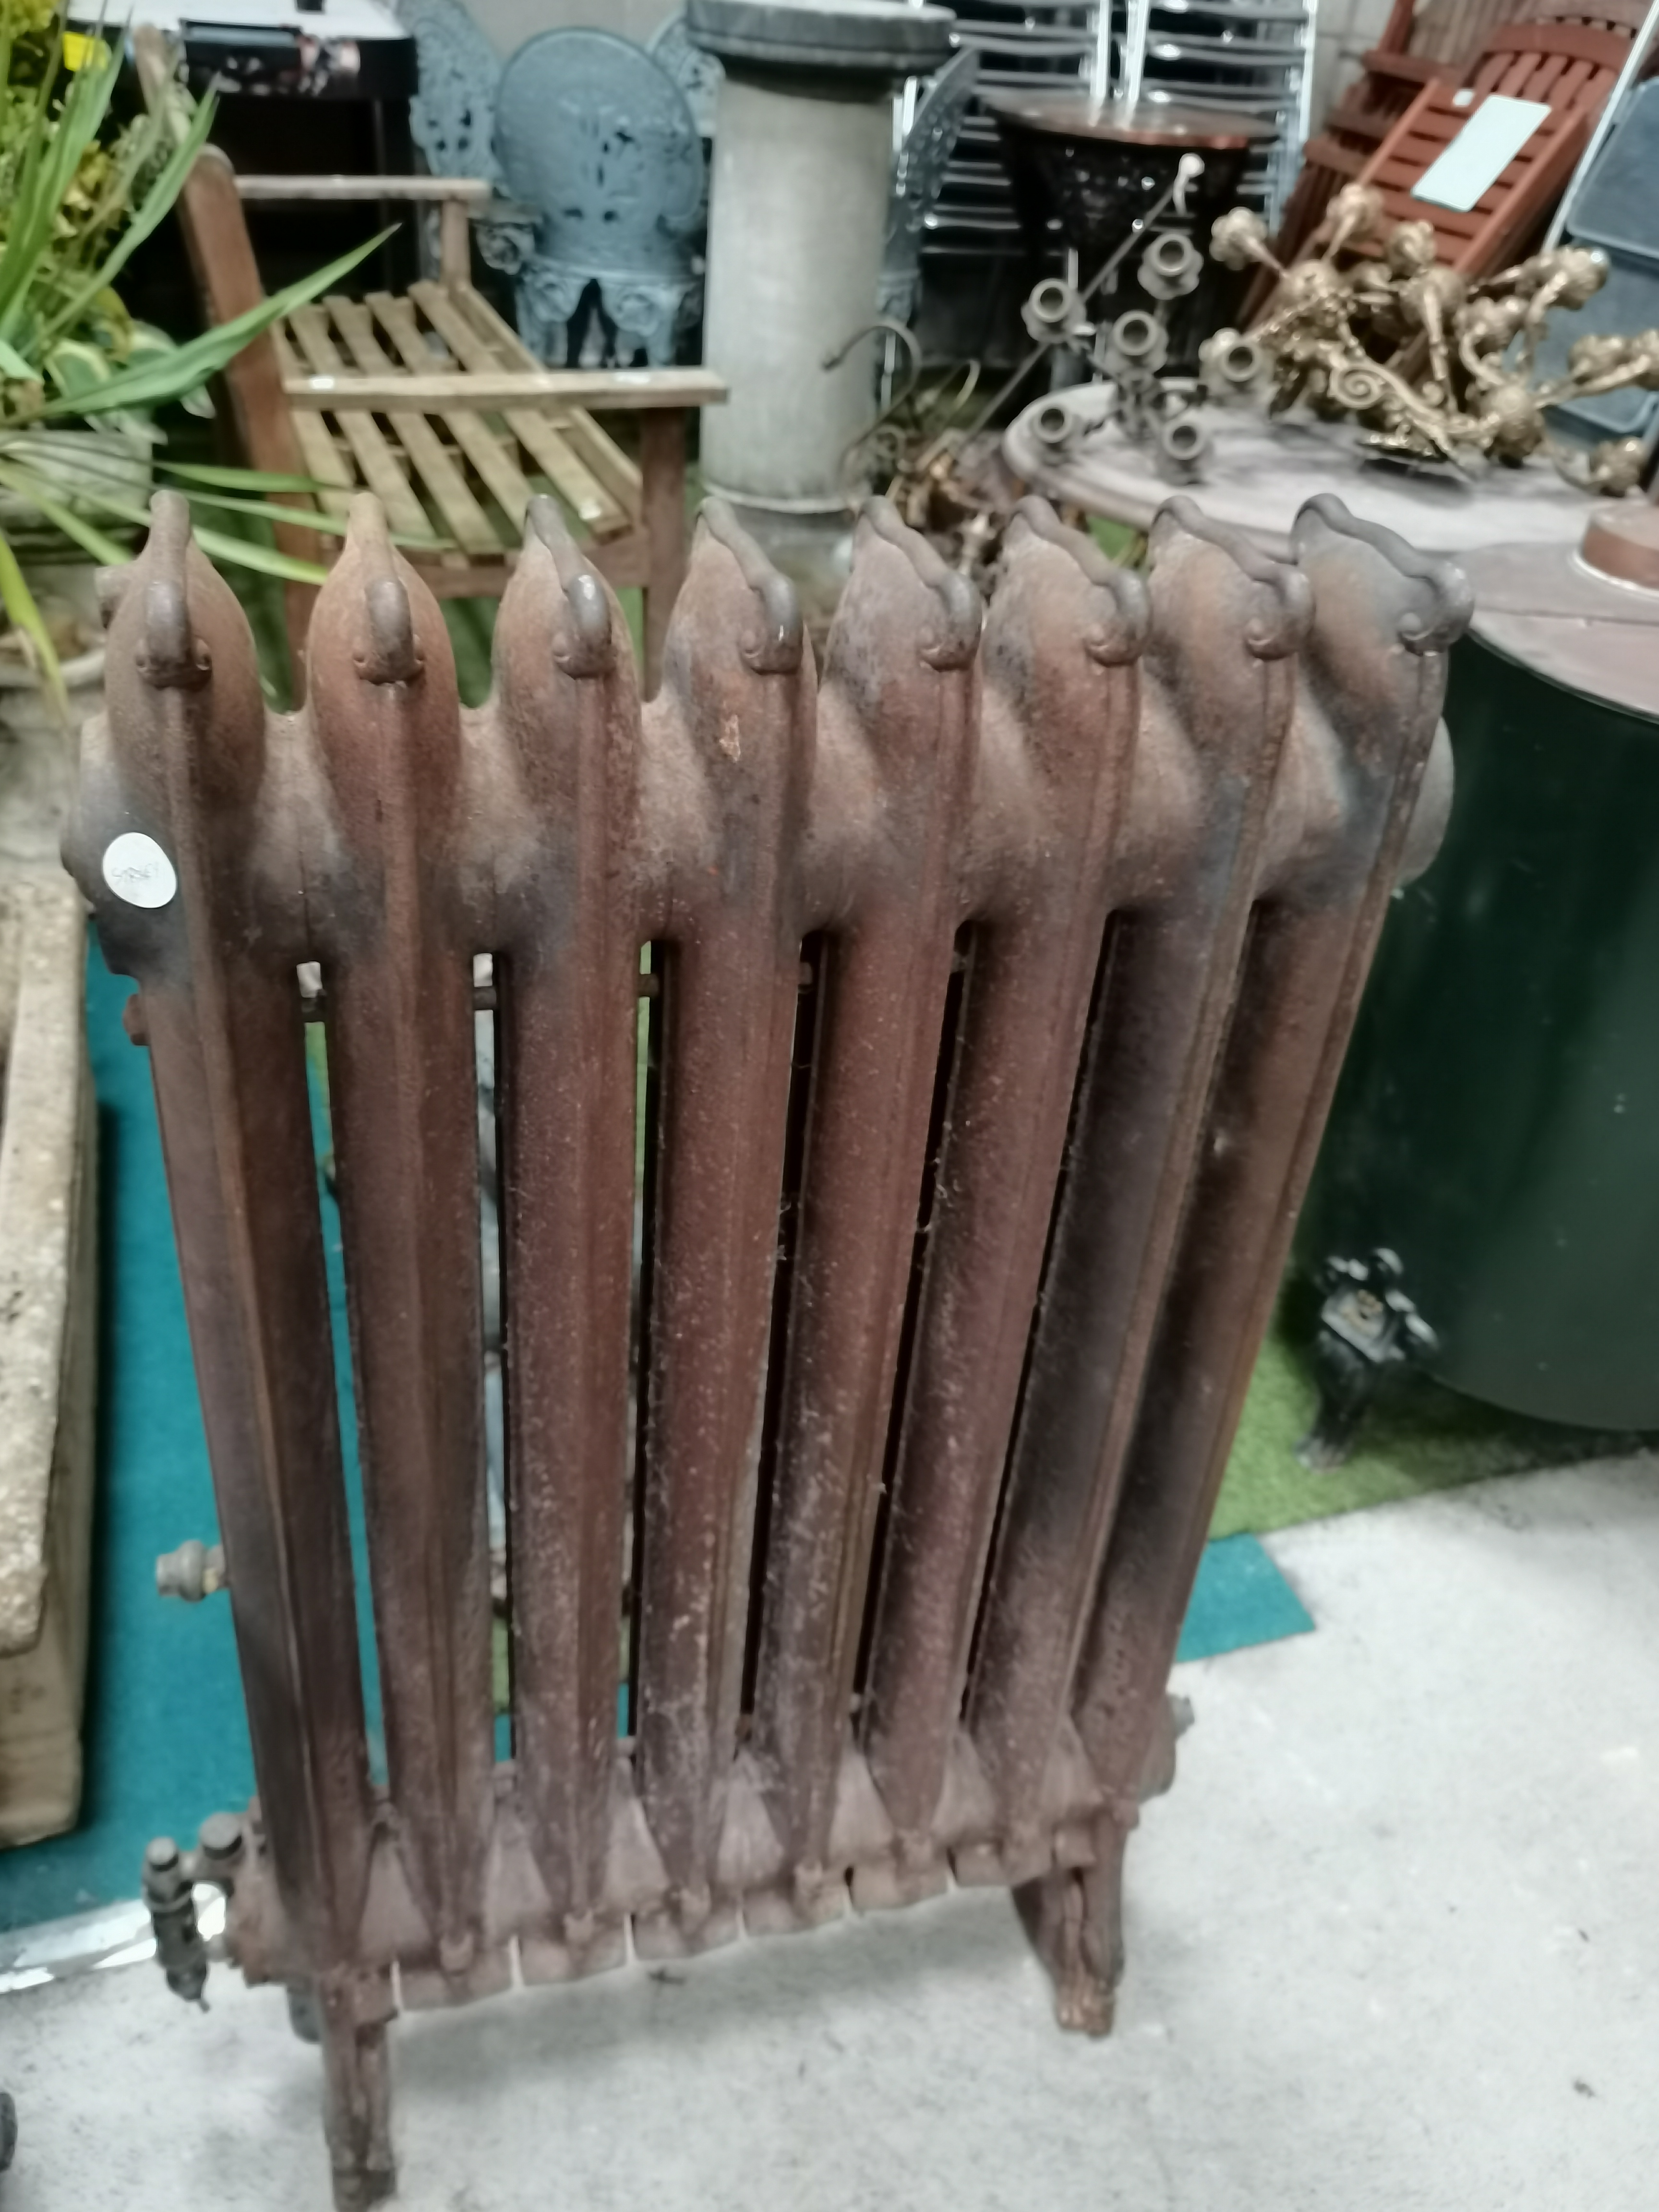 4 x antique cast iron radiators ( 2 at saleroom 2 x large ones at the house in York to be - Image 2 of 7